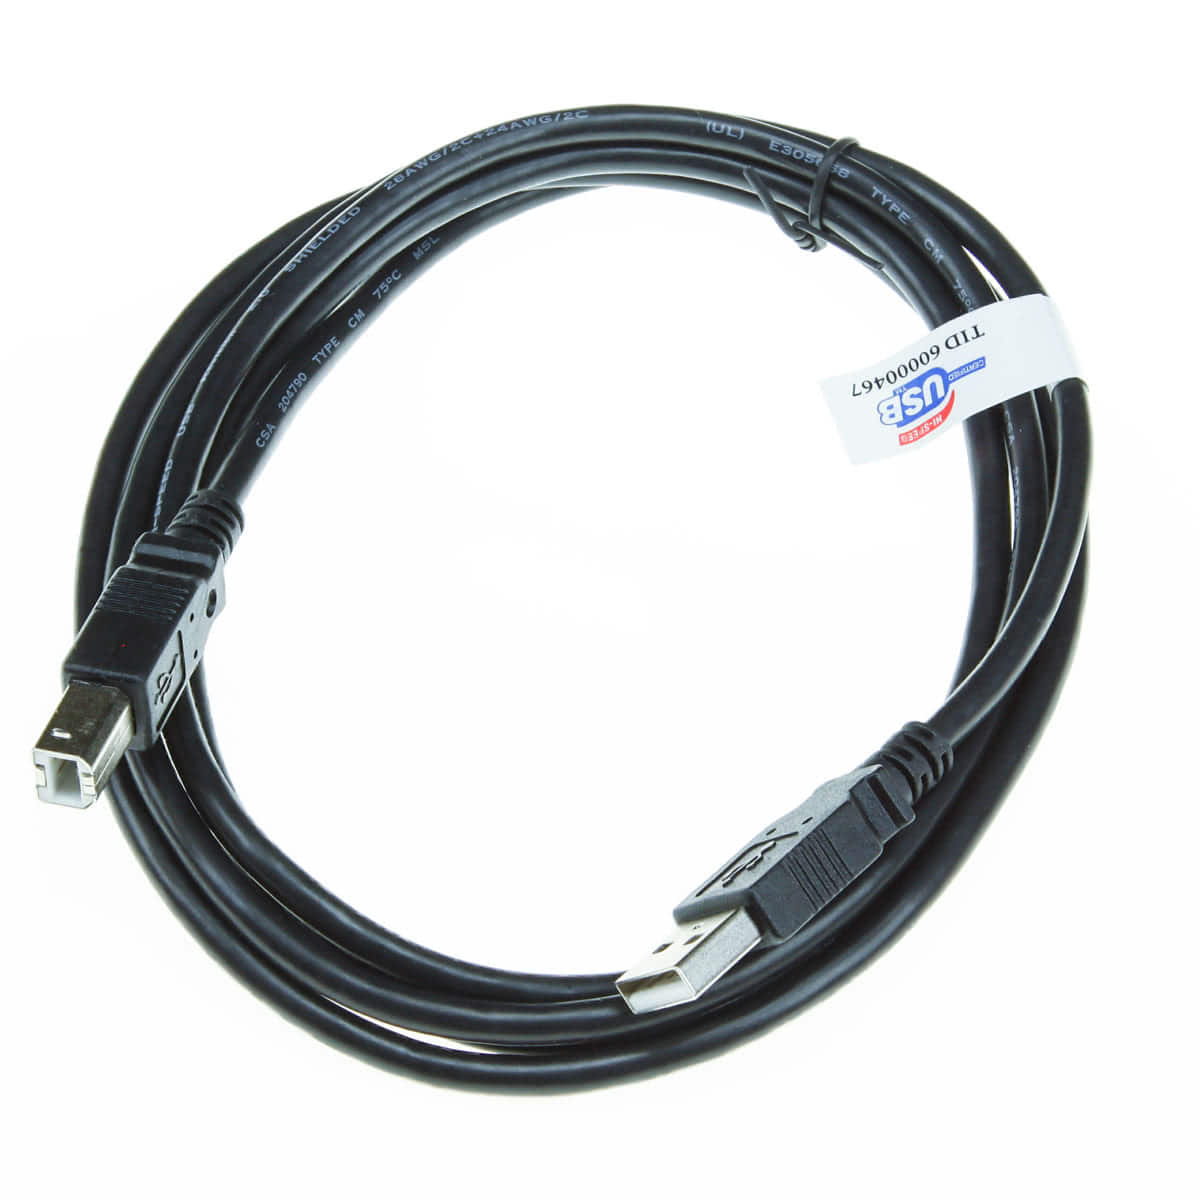 USB Tuning Cable for MegaSquirt-III